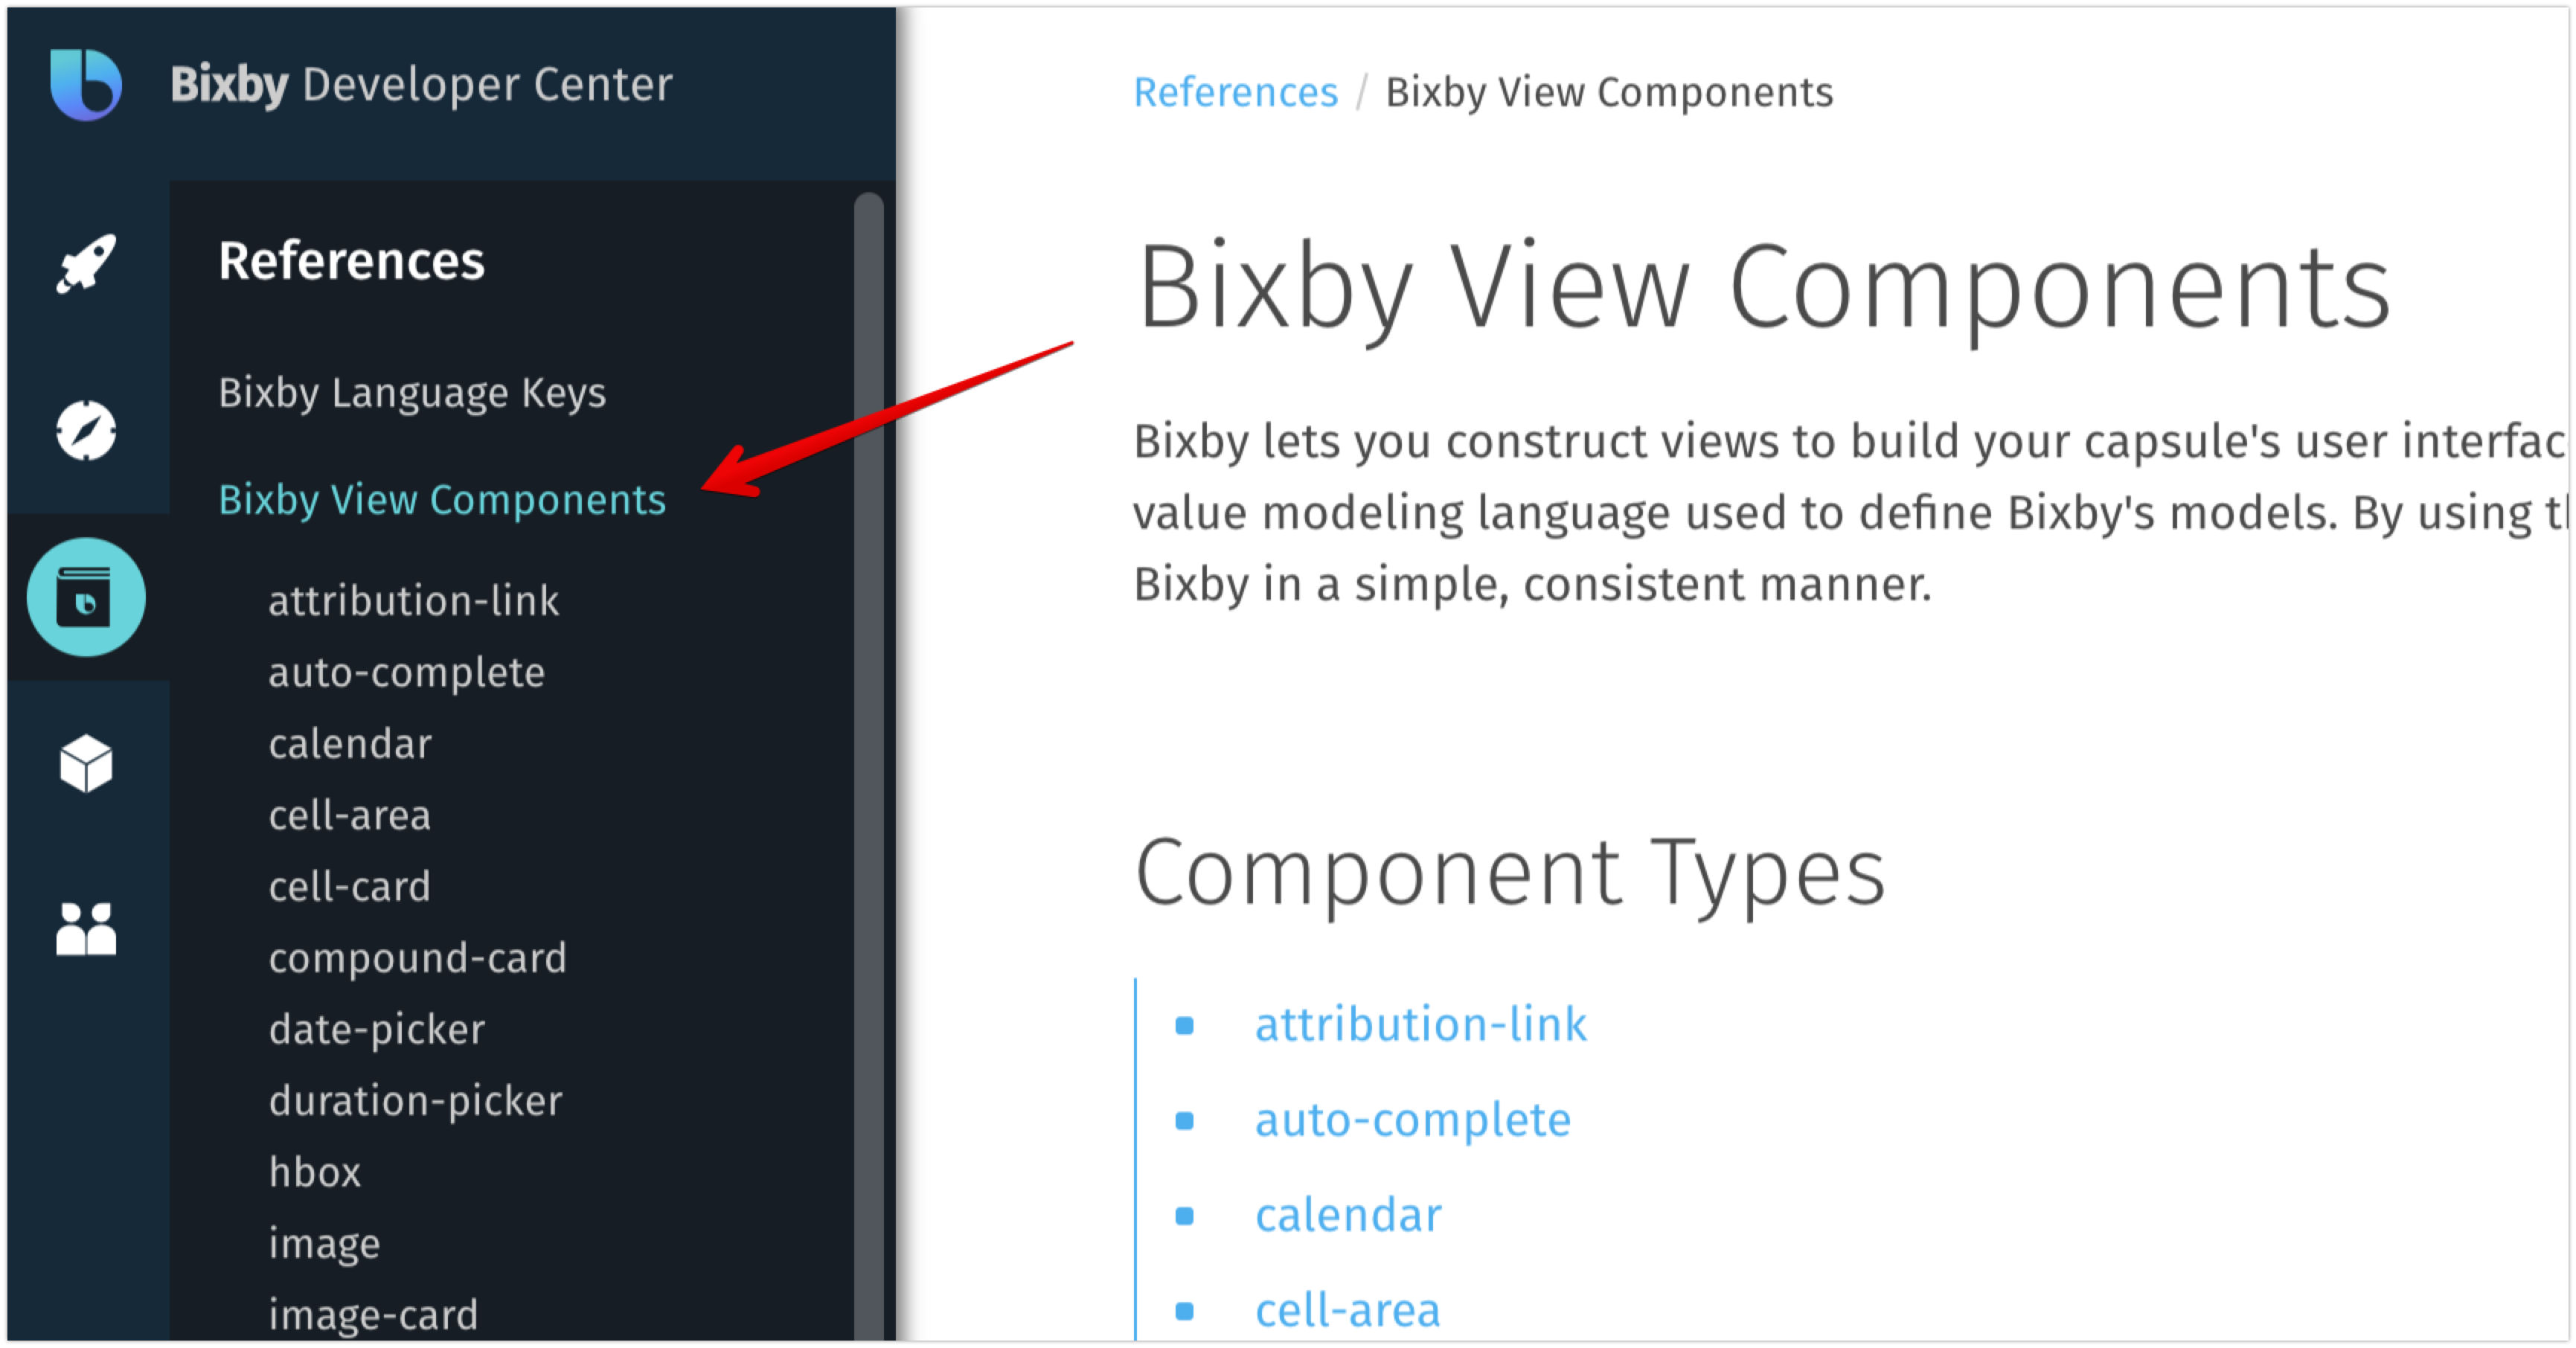 Bixby Views Components Reference